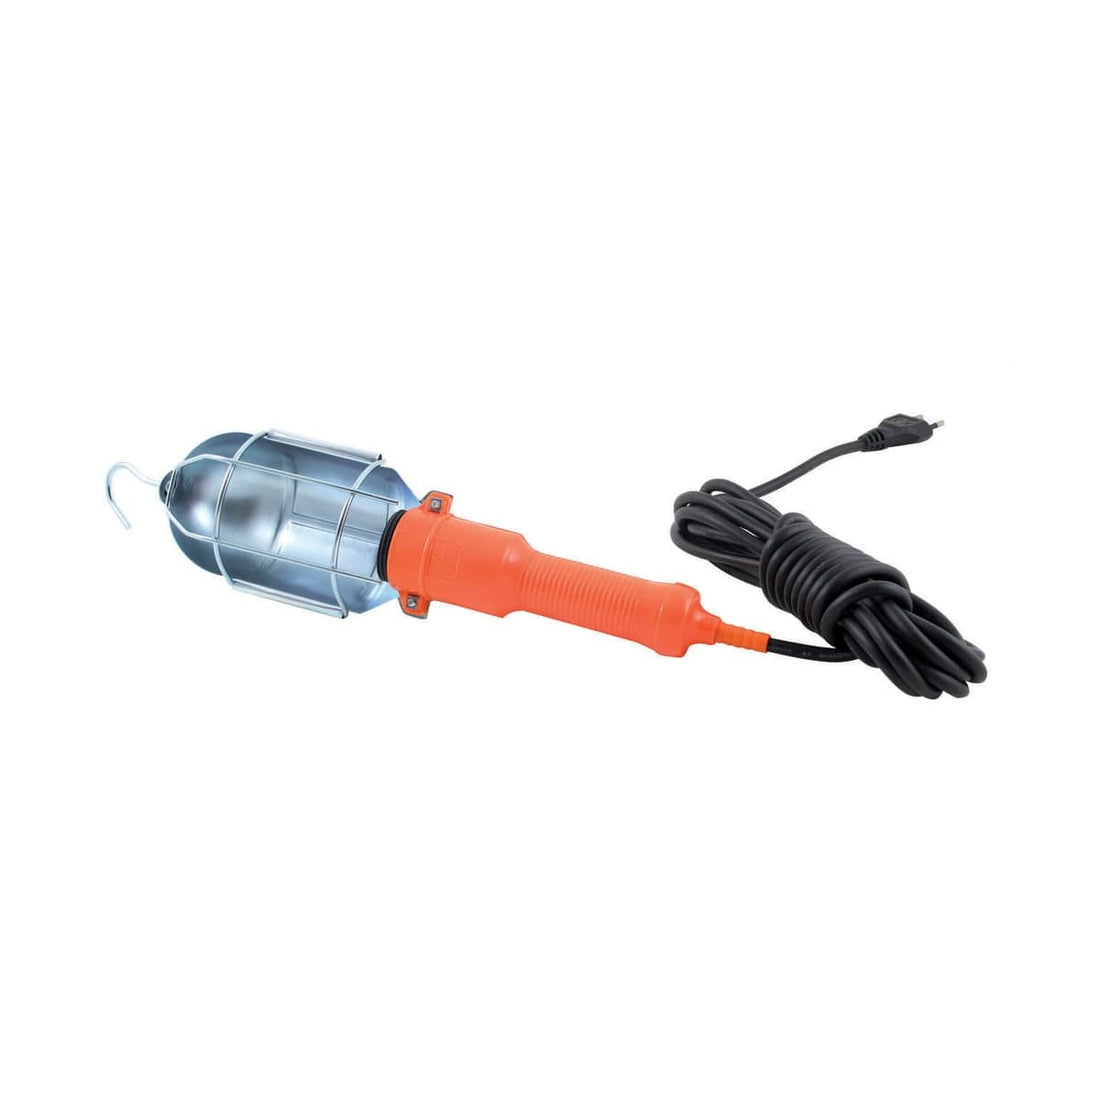 CARRIAGE TORCH WITH WIRE 5MT - best price from Maltashopper.com BR420006782